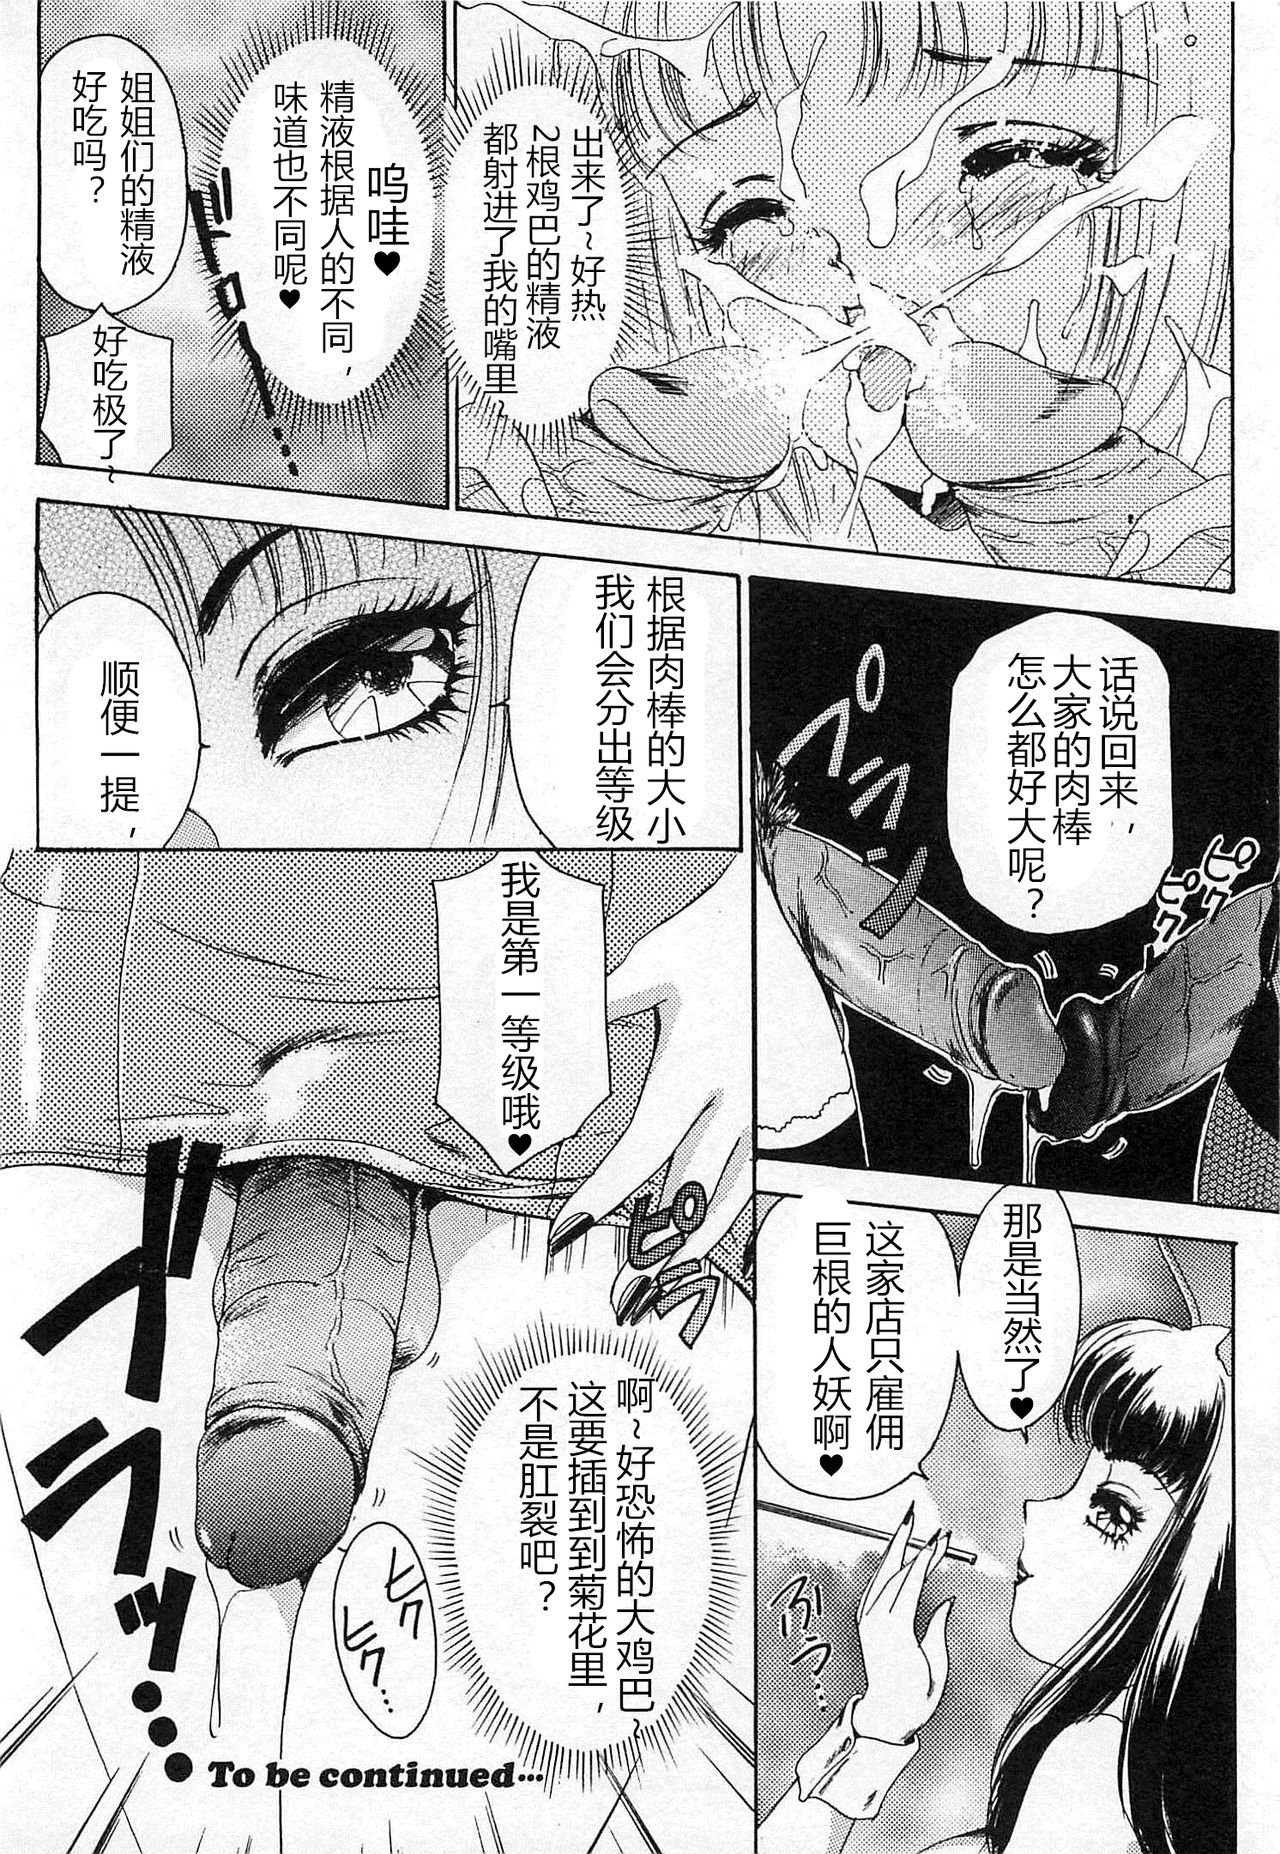 [The Amanoja9] T.S. I LOVE YOU chapter 05 [Chinese] [M男个人汉化] page 8 full